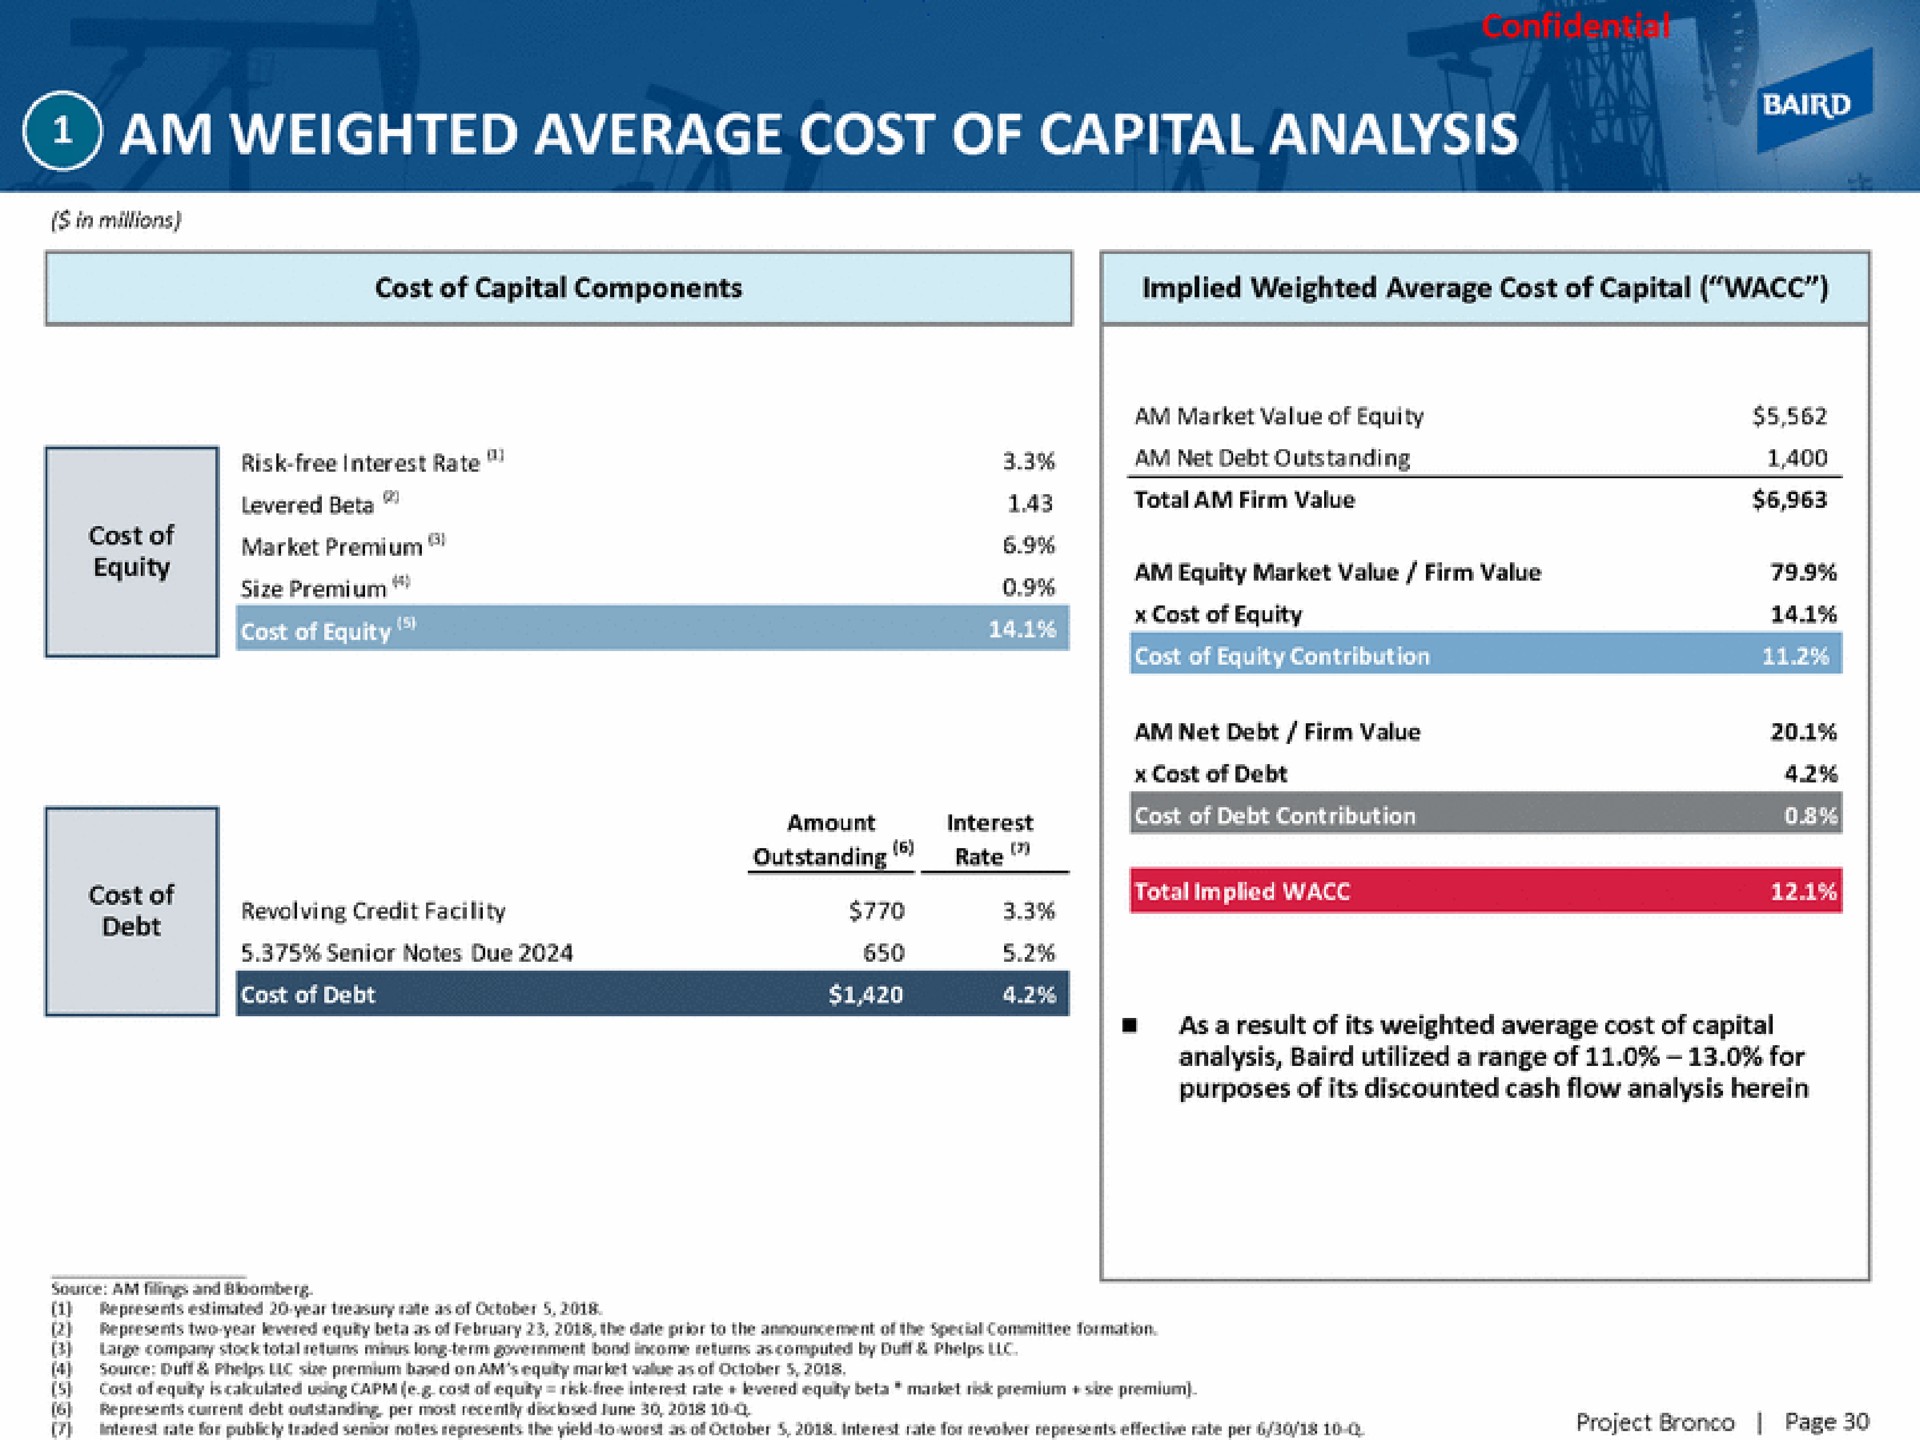 am weighted average cost of capital analysis | Baird